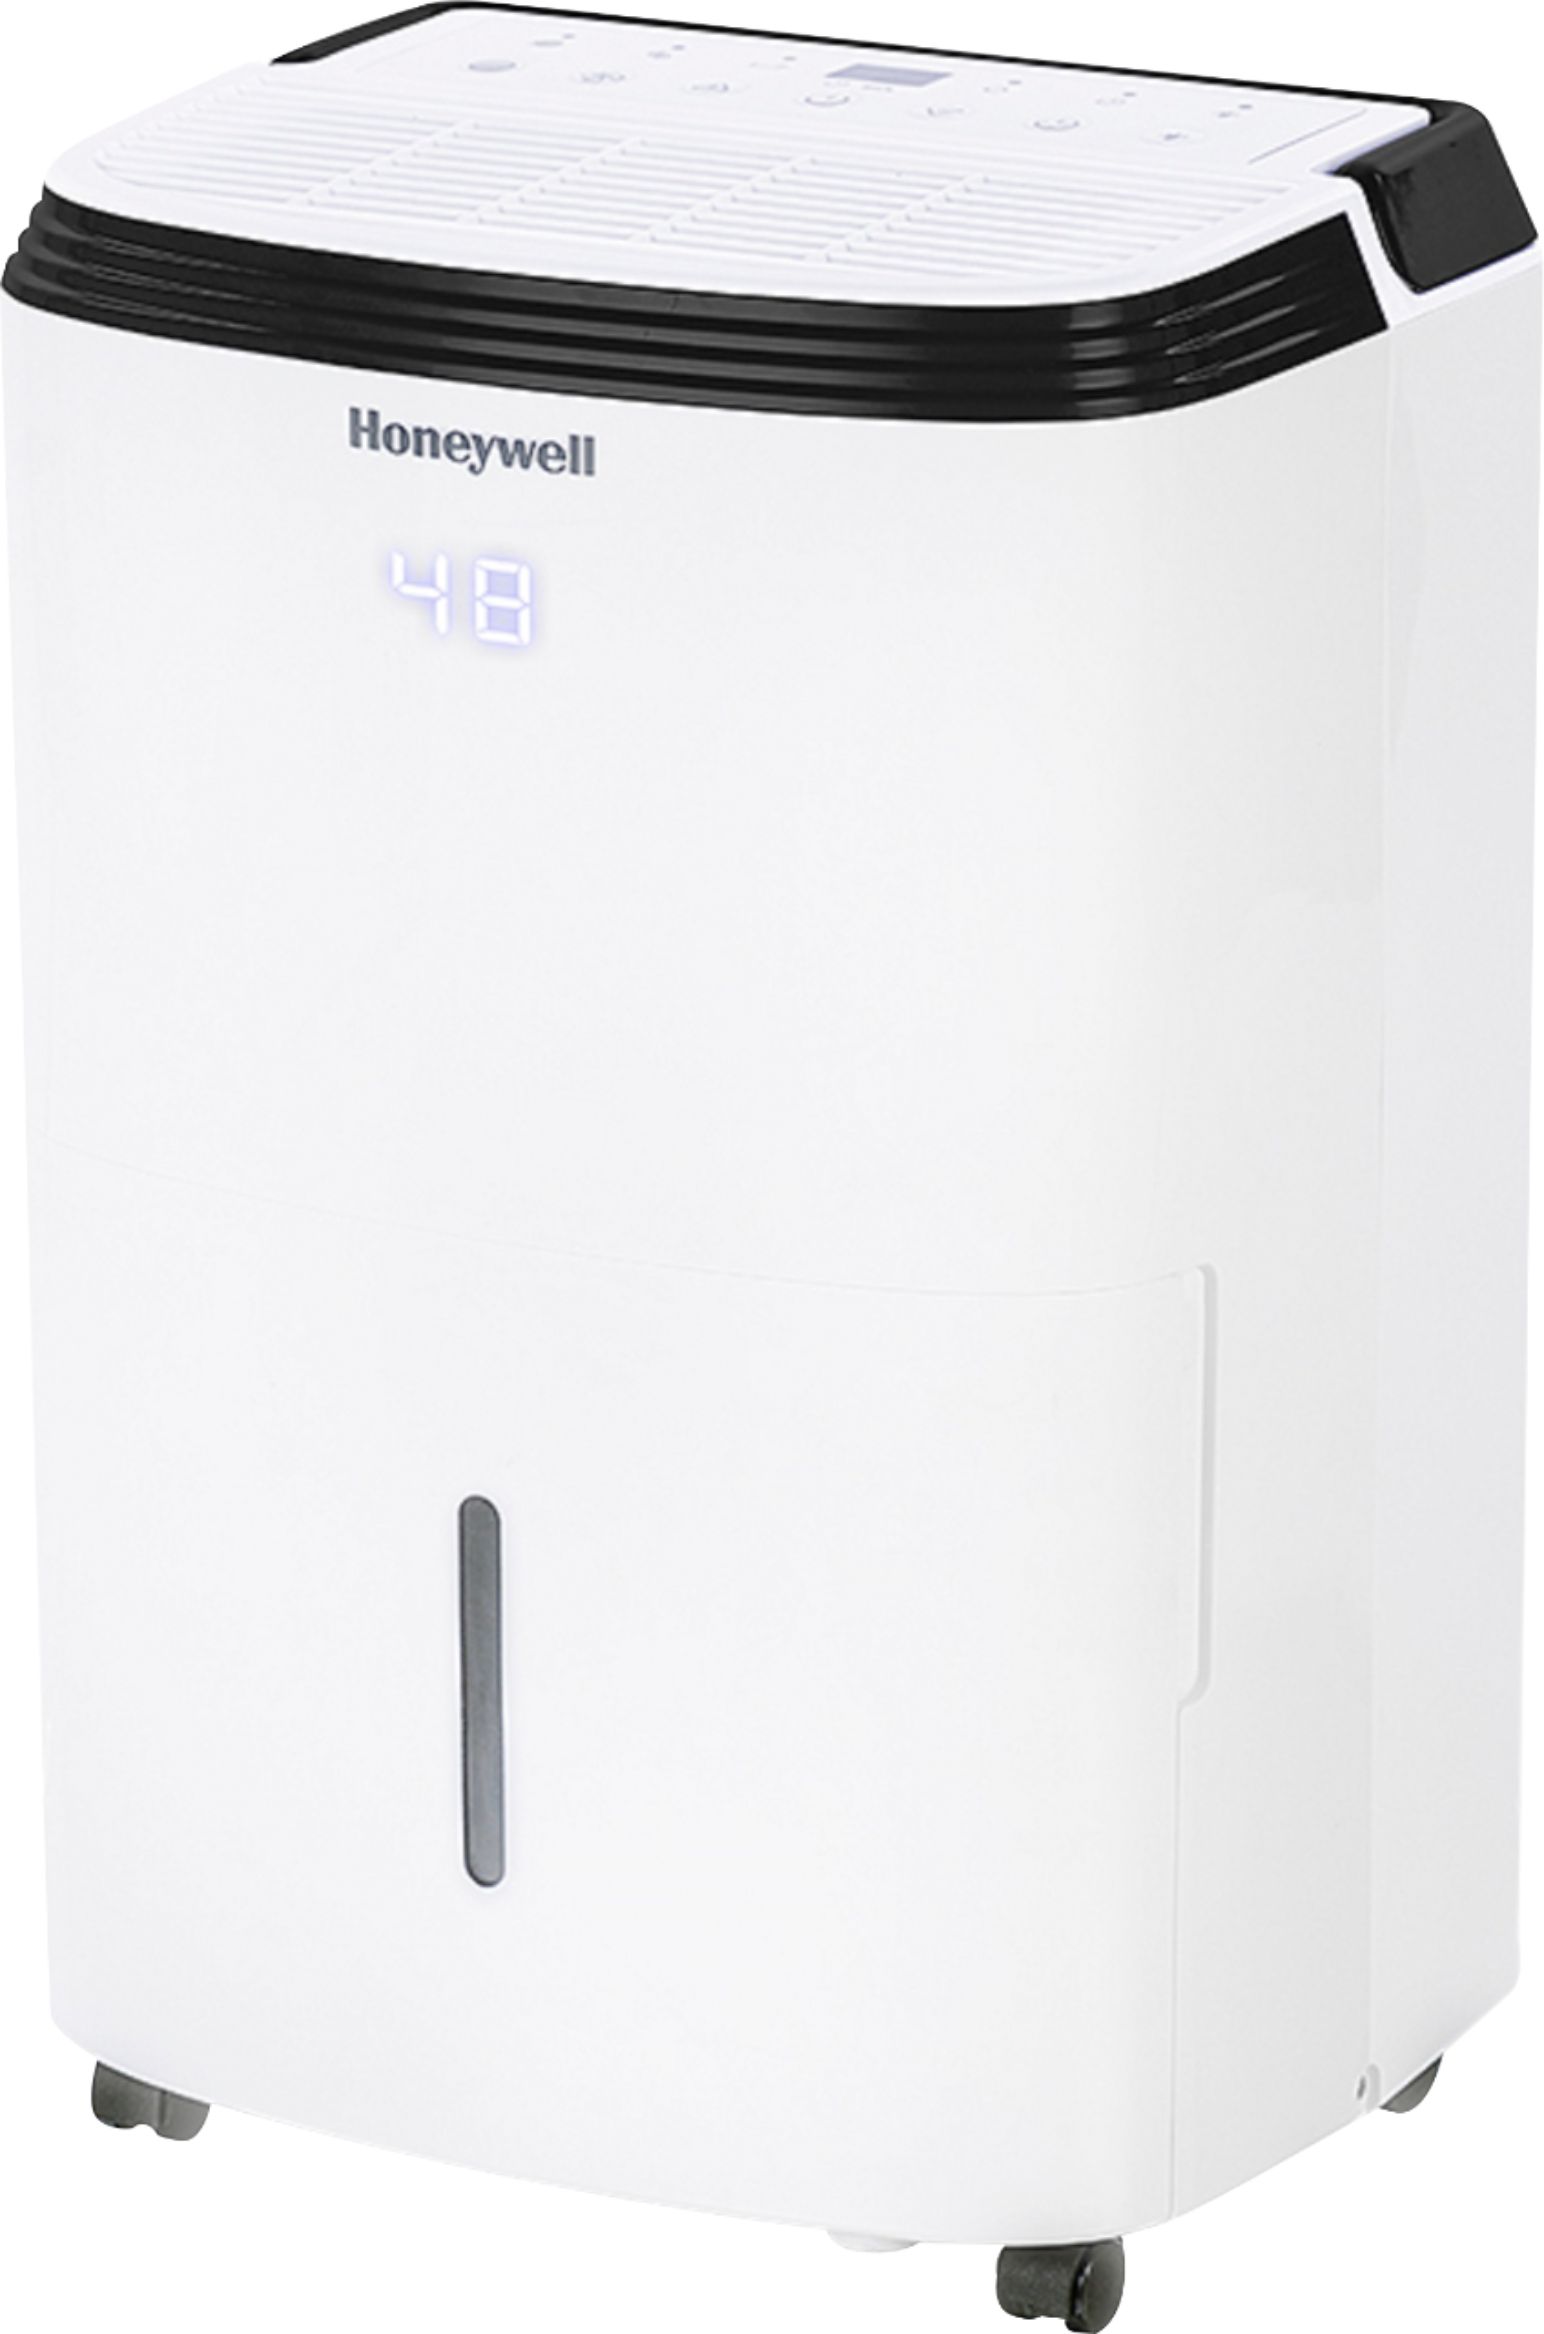 Angle View: Honeywell - Smart WiFi Energy Star Dehumidifier for Basements & Rooms Up to 4000 Sq.Ft. with Alexa Voice Control & Anti-Spill Design - White